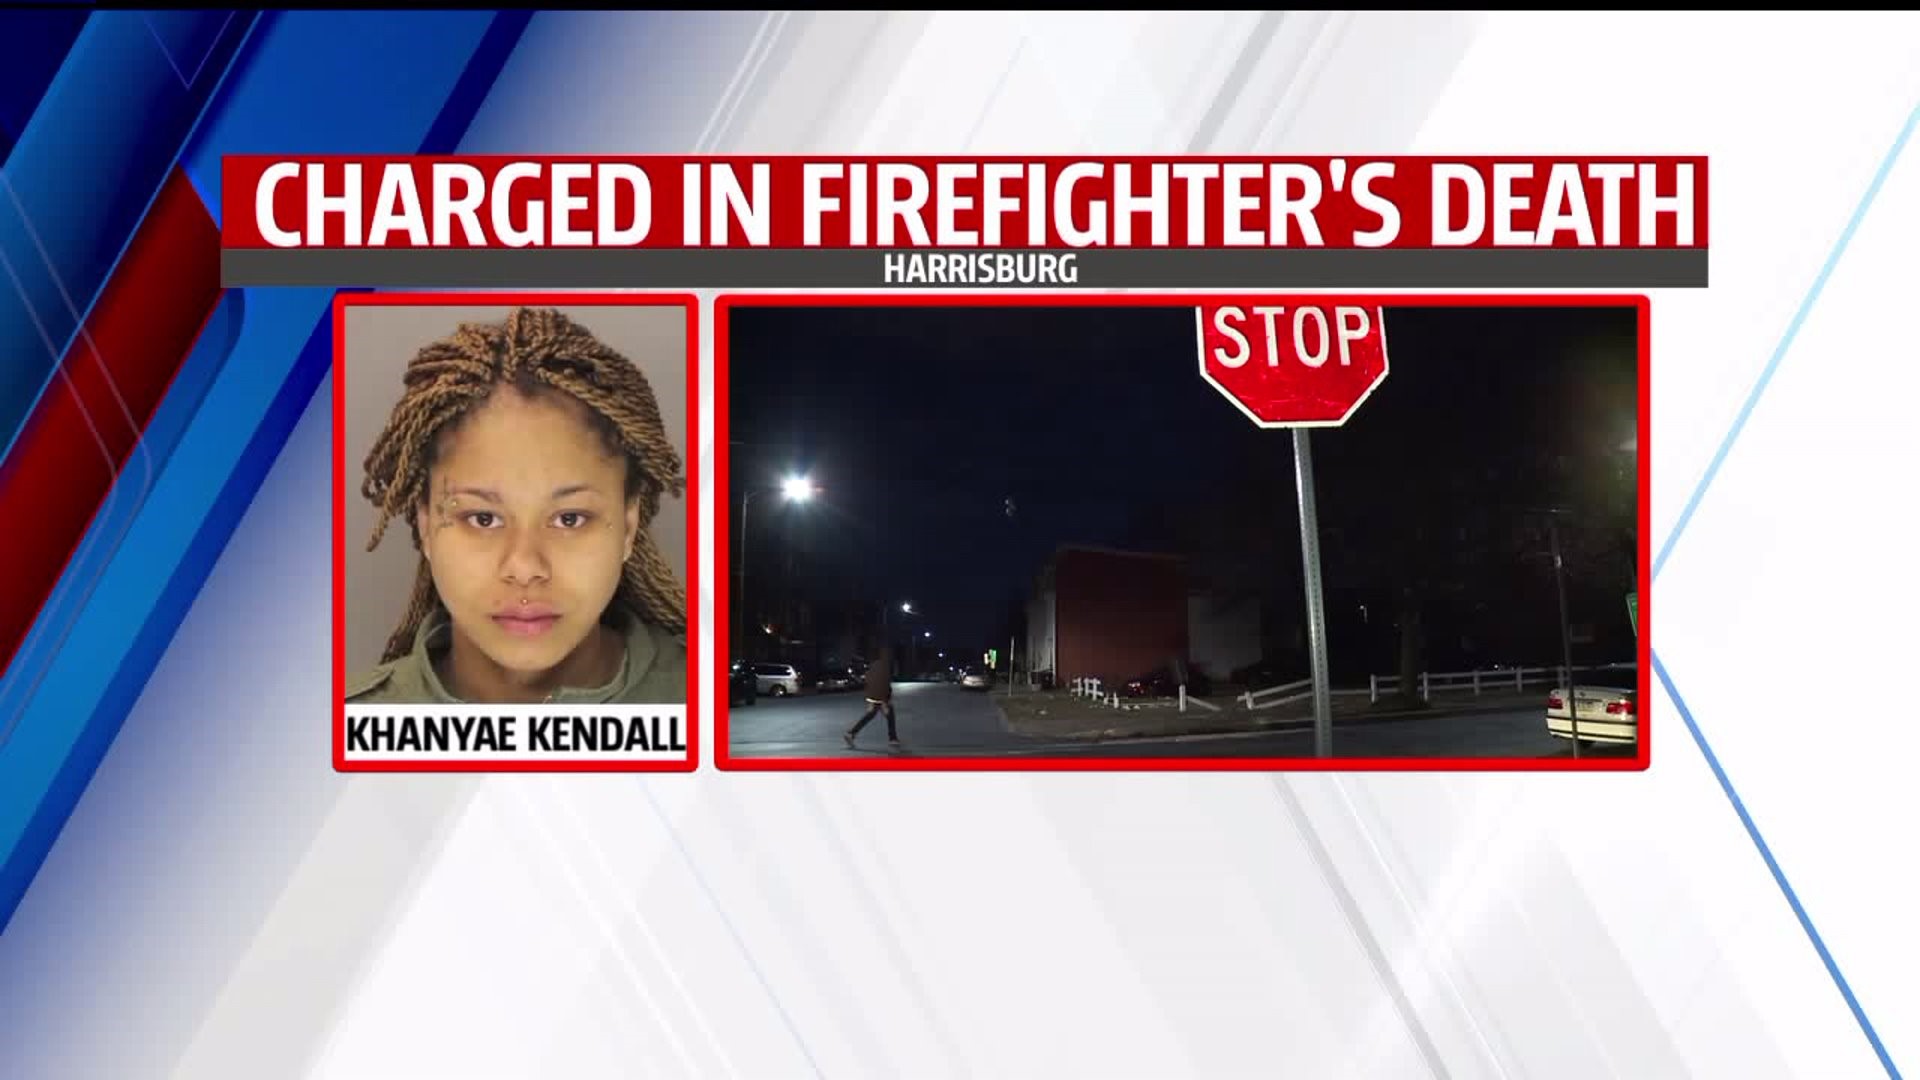 A woman who was driving under the influence when she killed a harrisburg firefighter will be sentenced today